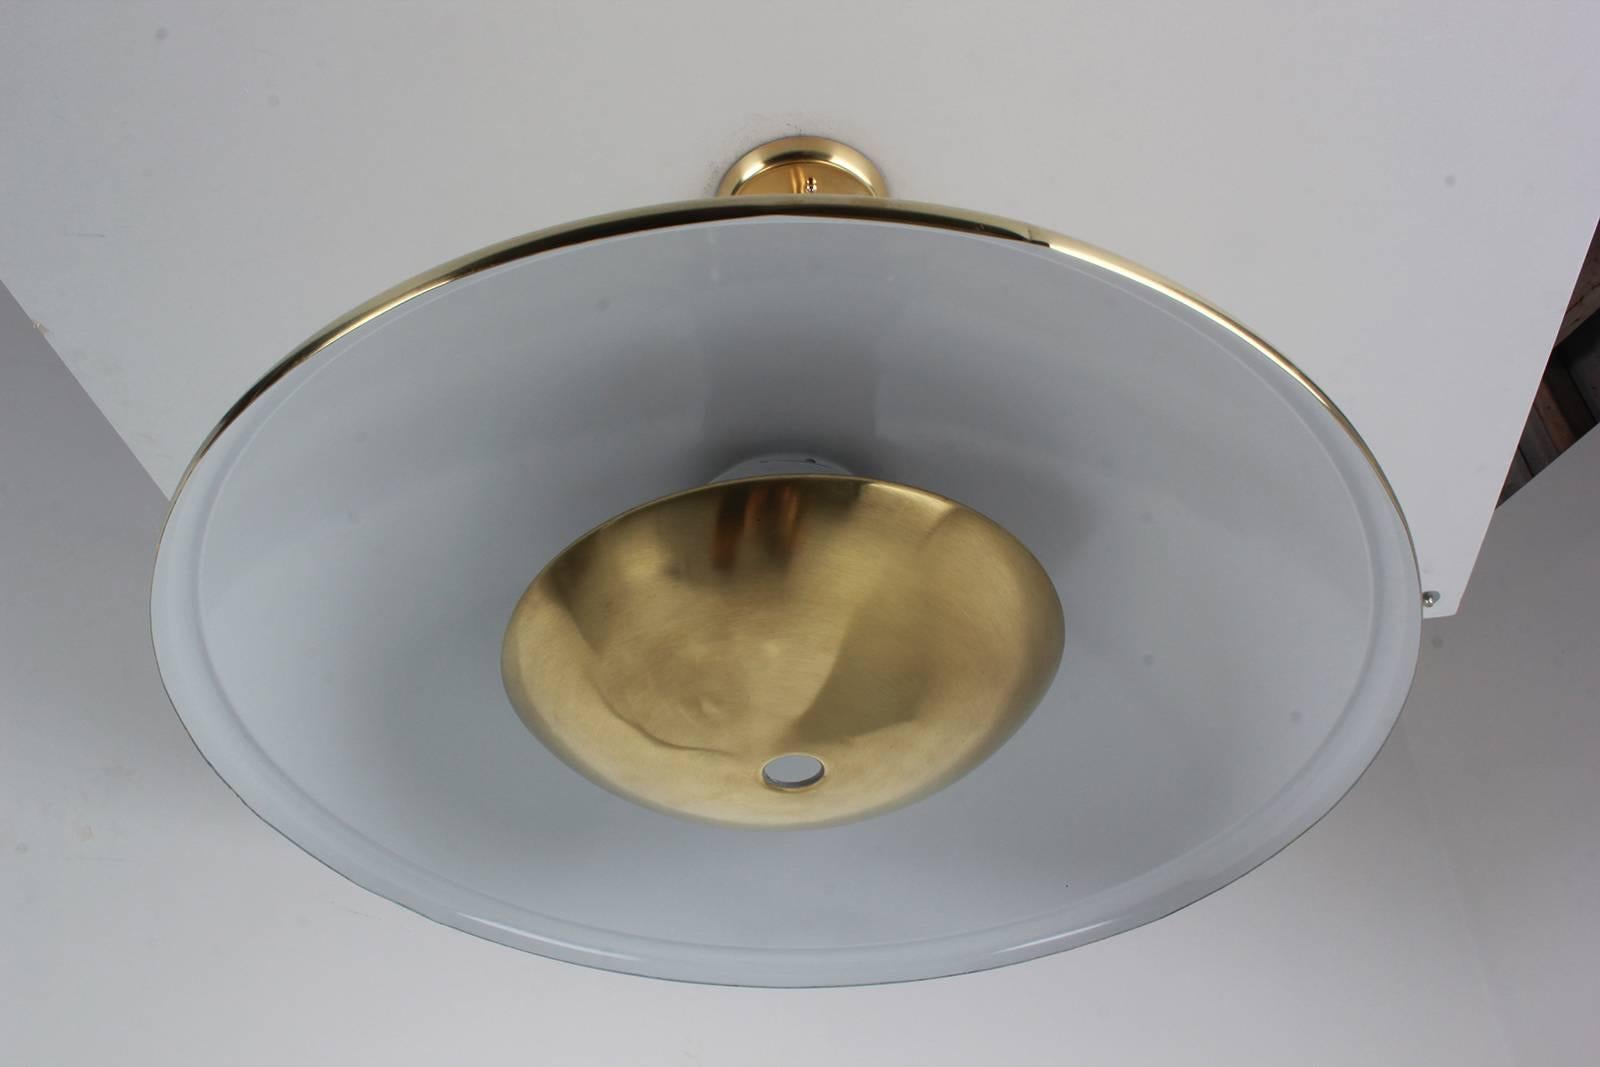 Simplistically designed brass dome pendant with brass reflector.
Newly rewired.
Great design.